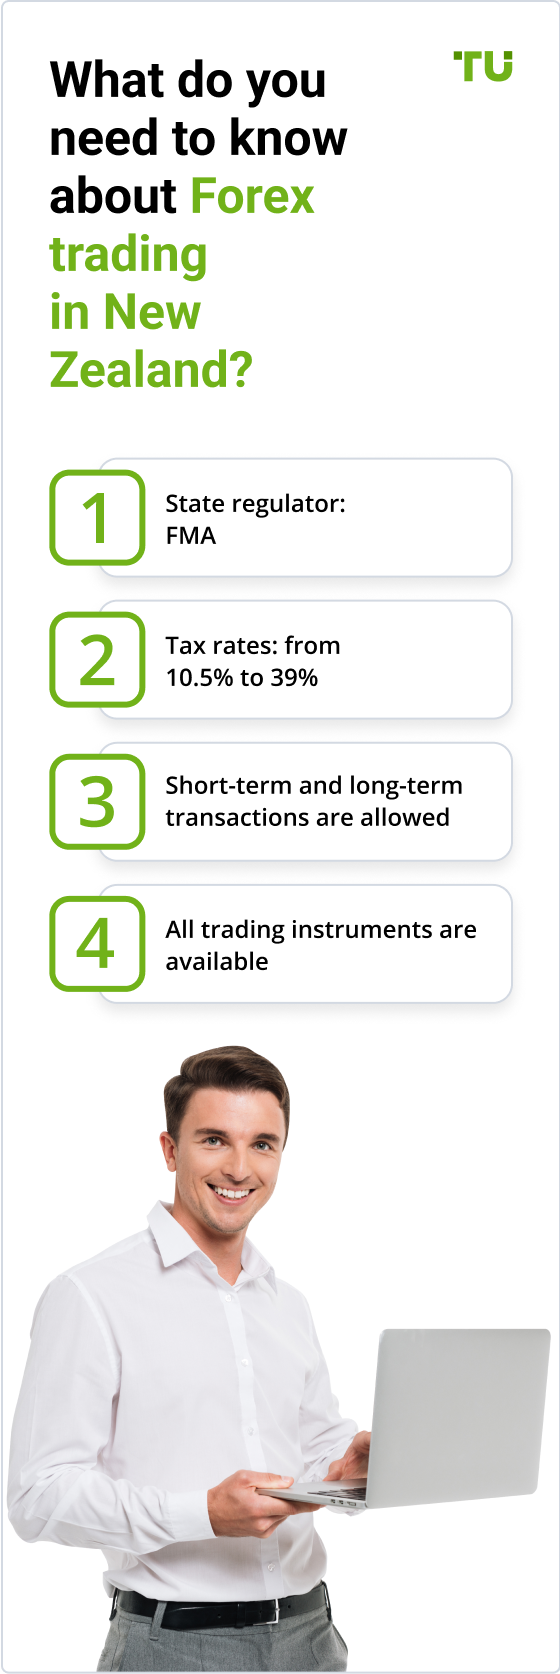 What do you need to know about Forex trading in New Zealand? 